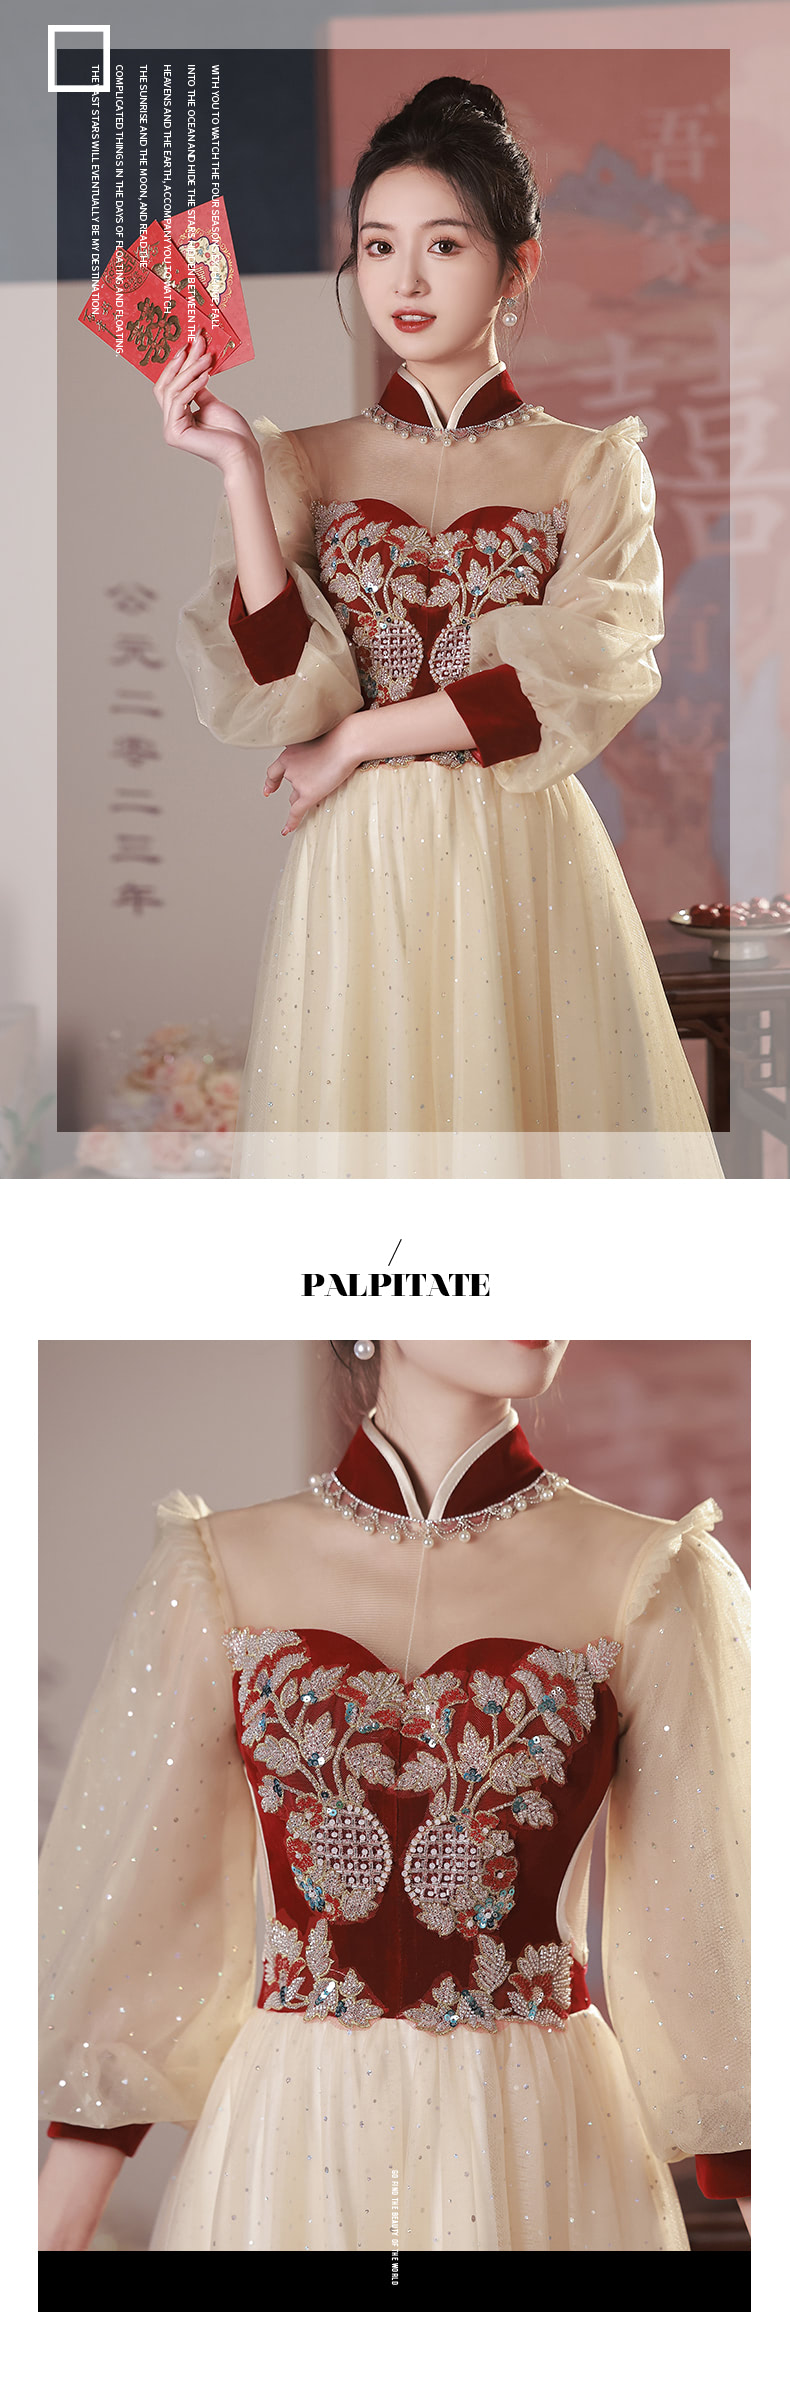 A-Line-Floral-Embroidery-Wine-Red-Tulle-Sleeve-Prom-Party-Dress10